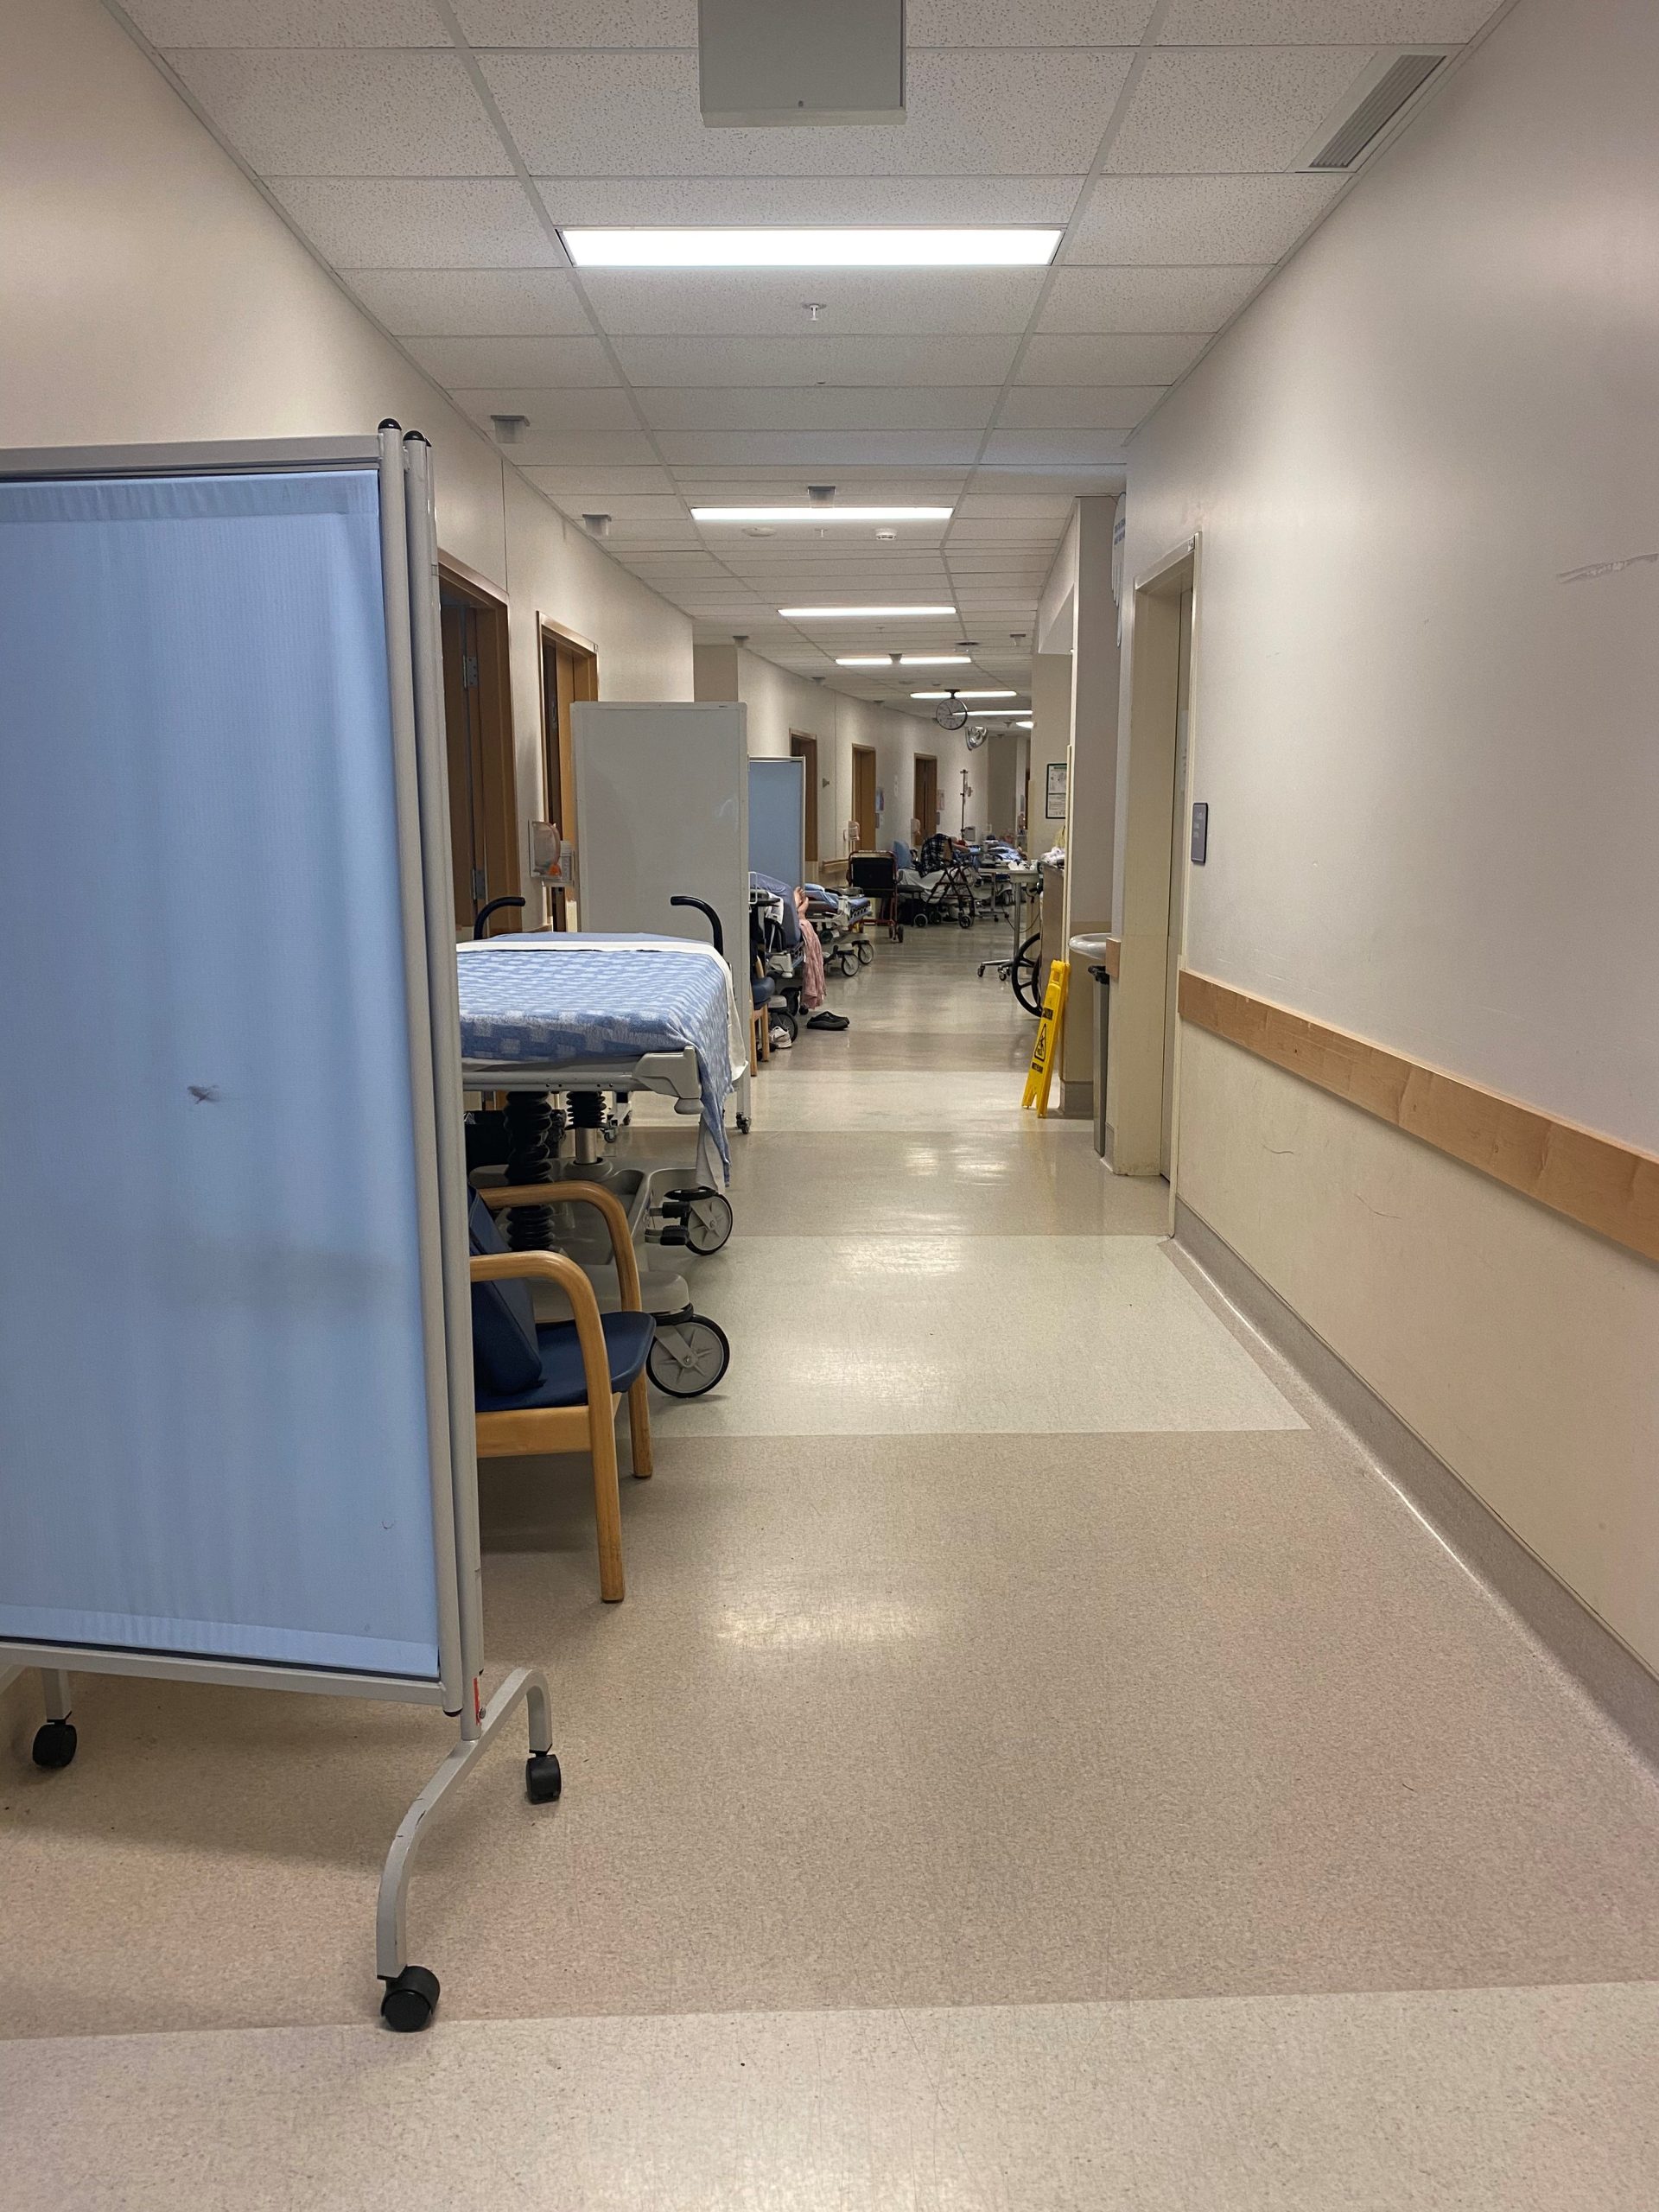 Stretchers lined up and down a hallway at Abbotsford Regional Hospital.